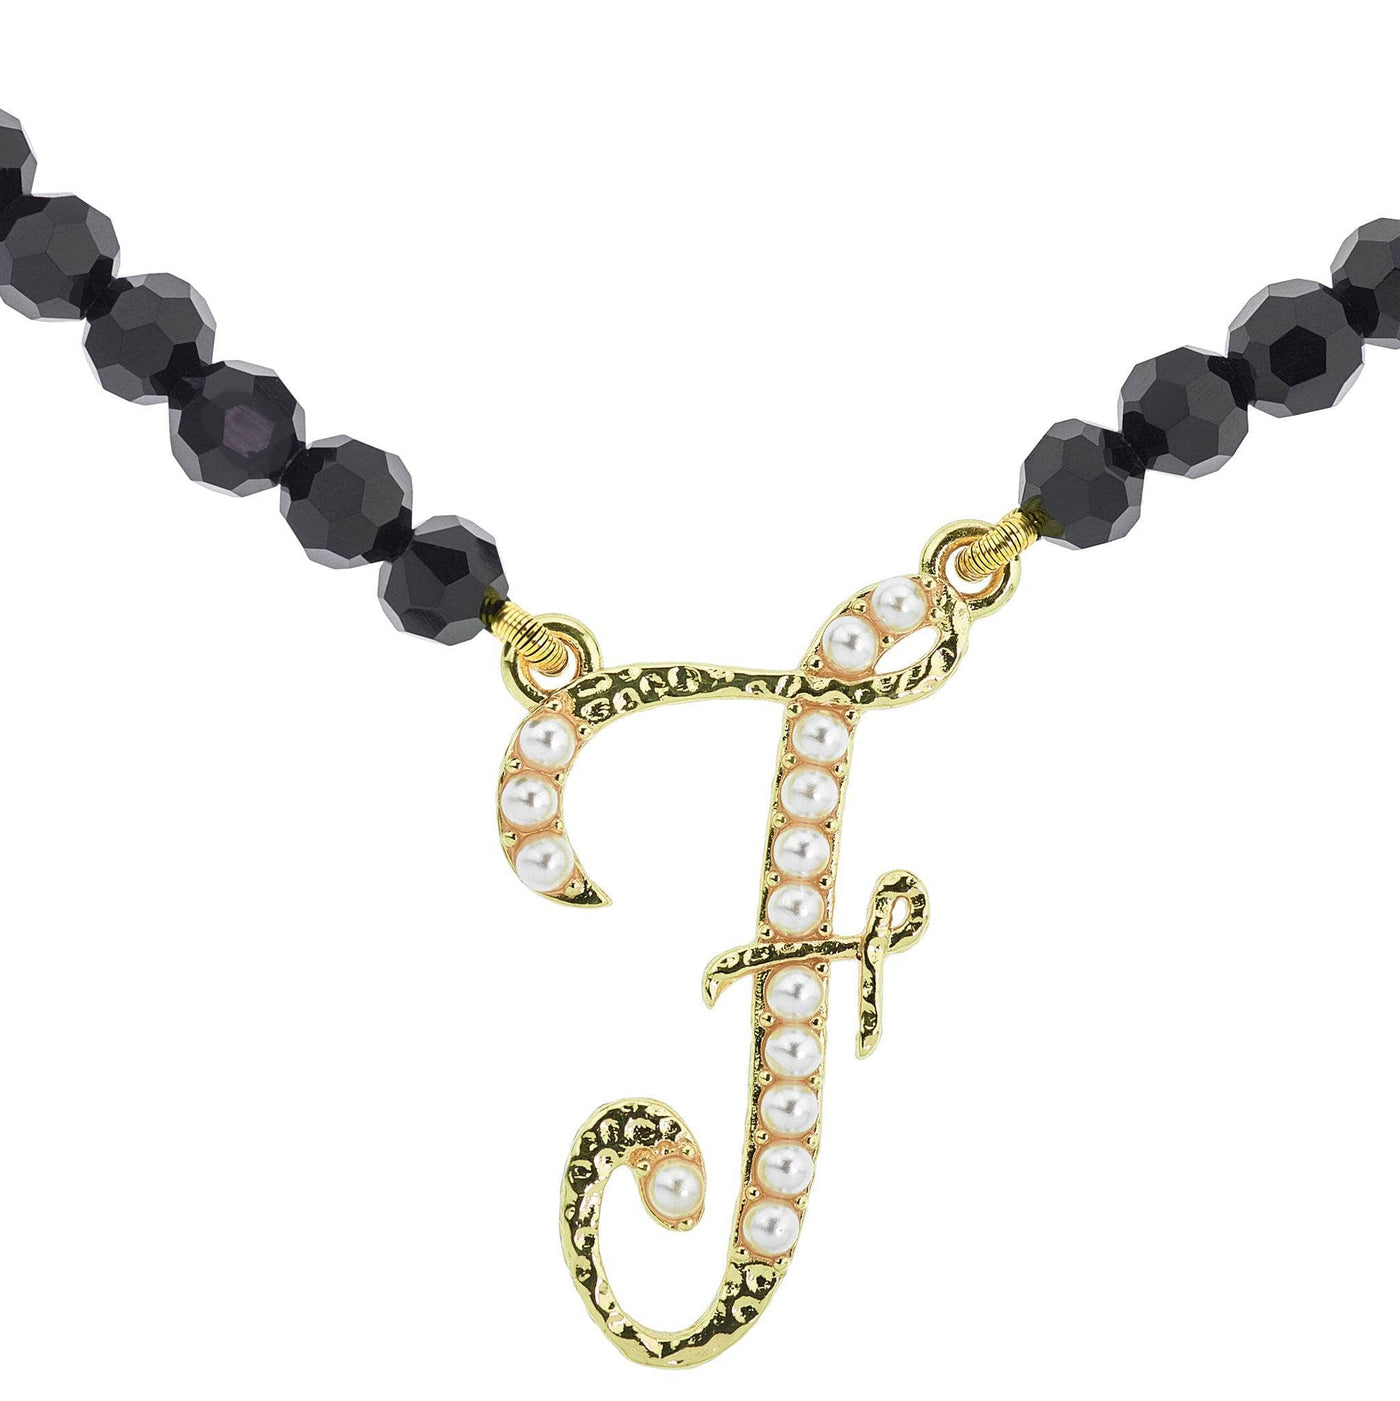 Heidi Daus®"The A to Z Sparkle" Beaded Initial Letter Necklace